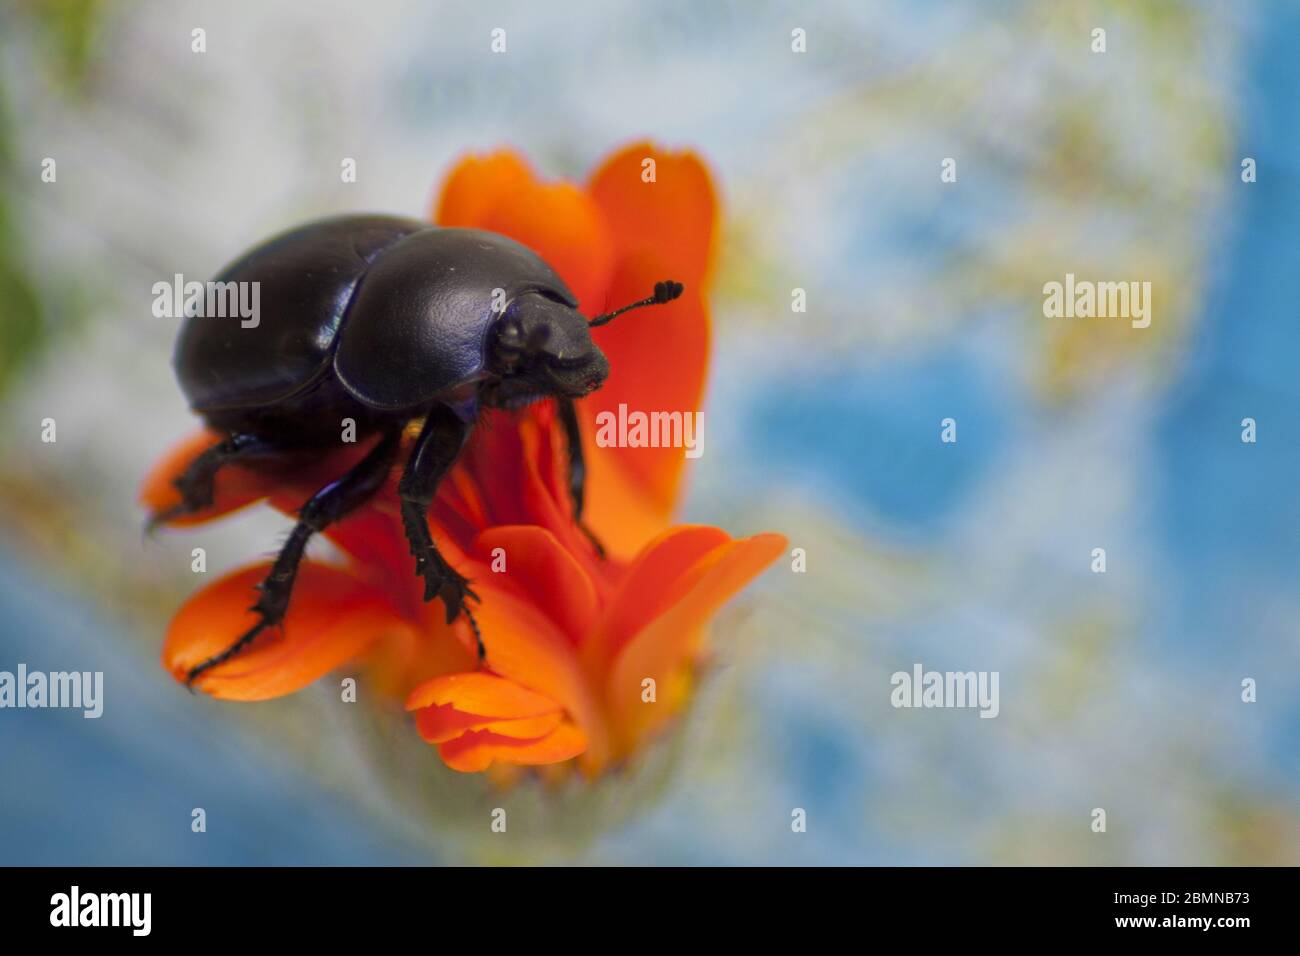 Dung beetle on an orange flower in close-up on a blue background. Stock Photo